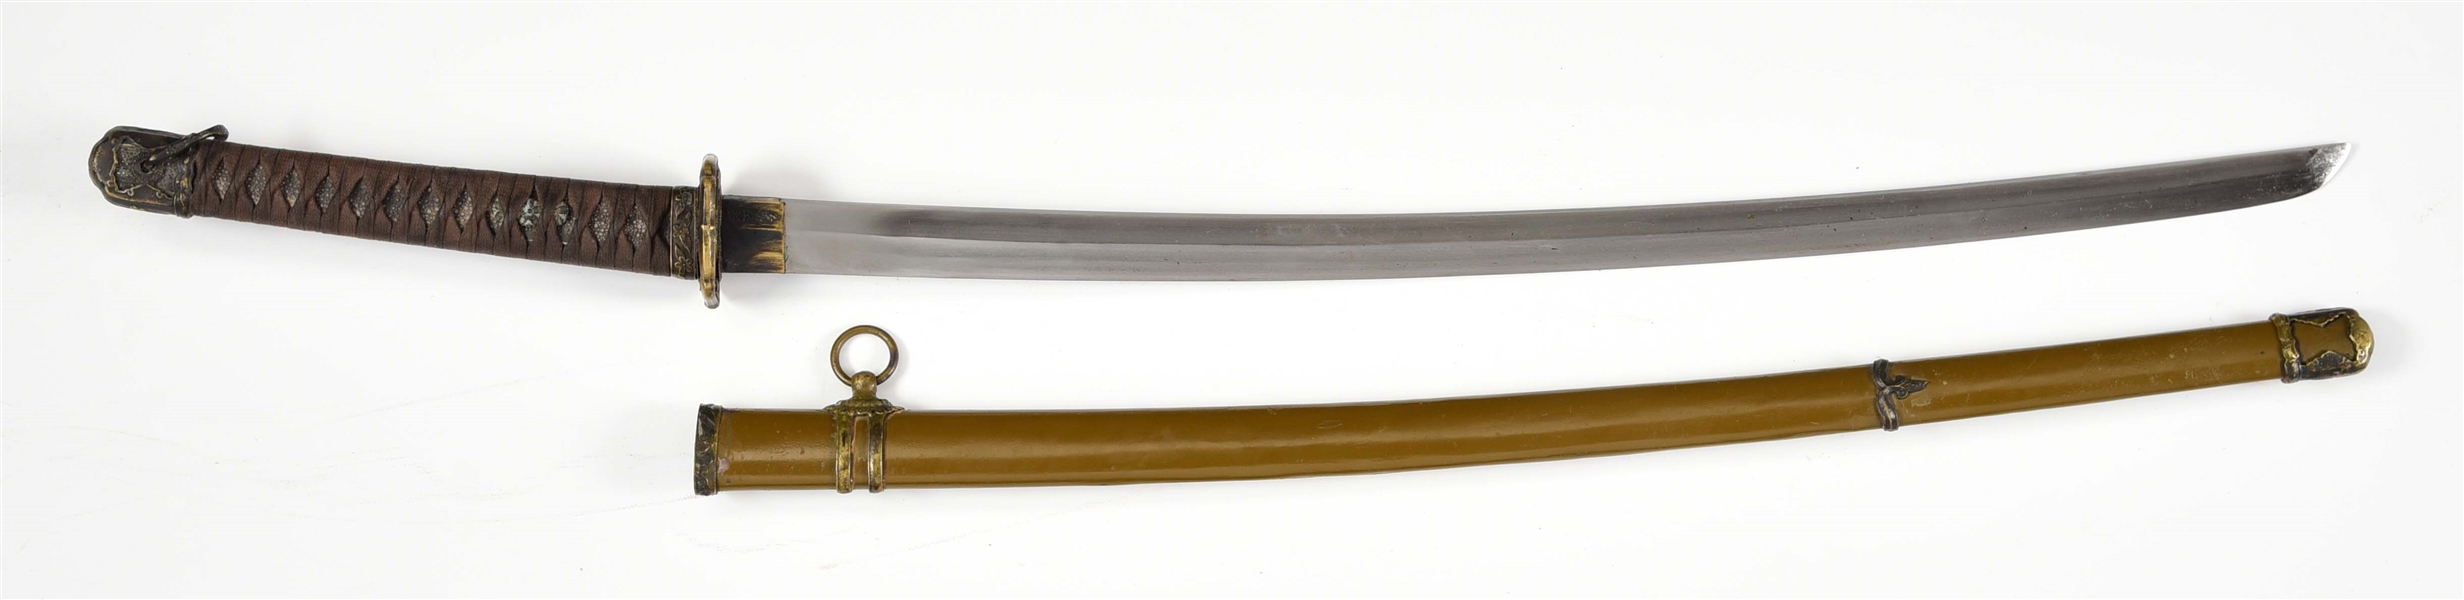 REPRODUCTION JAPANESE SWORD.